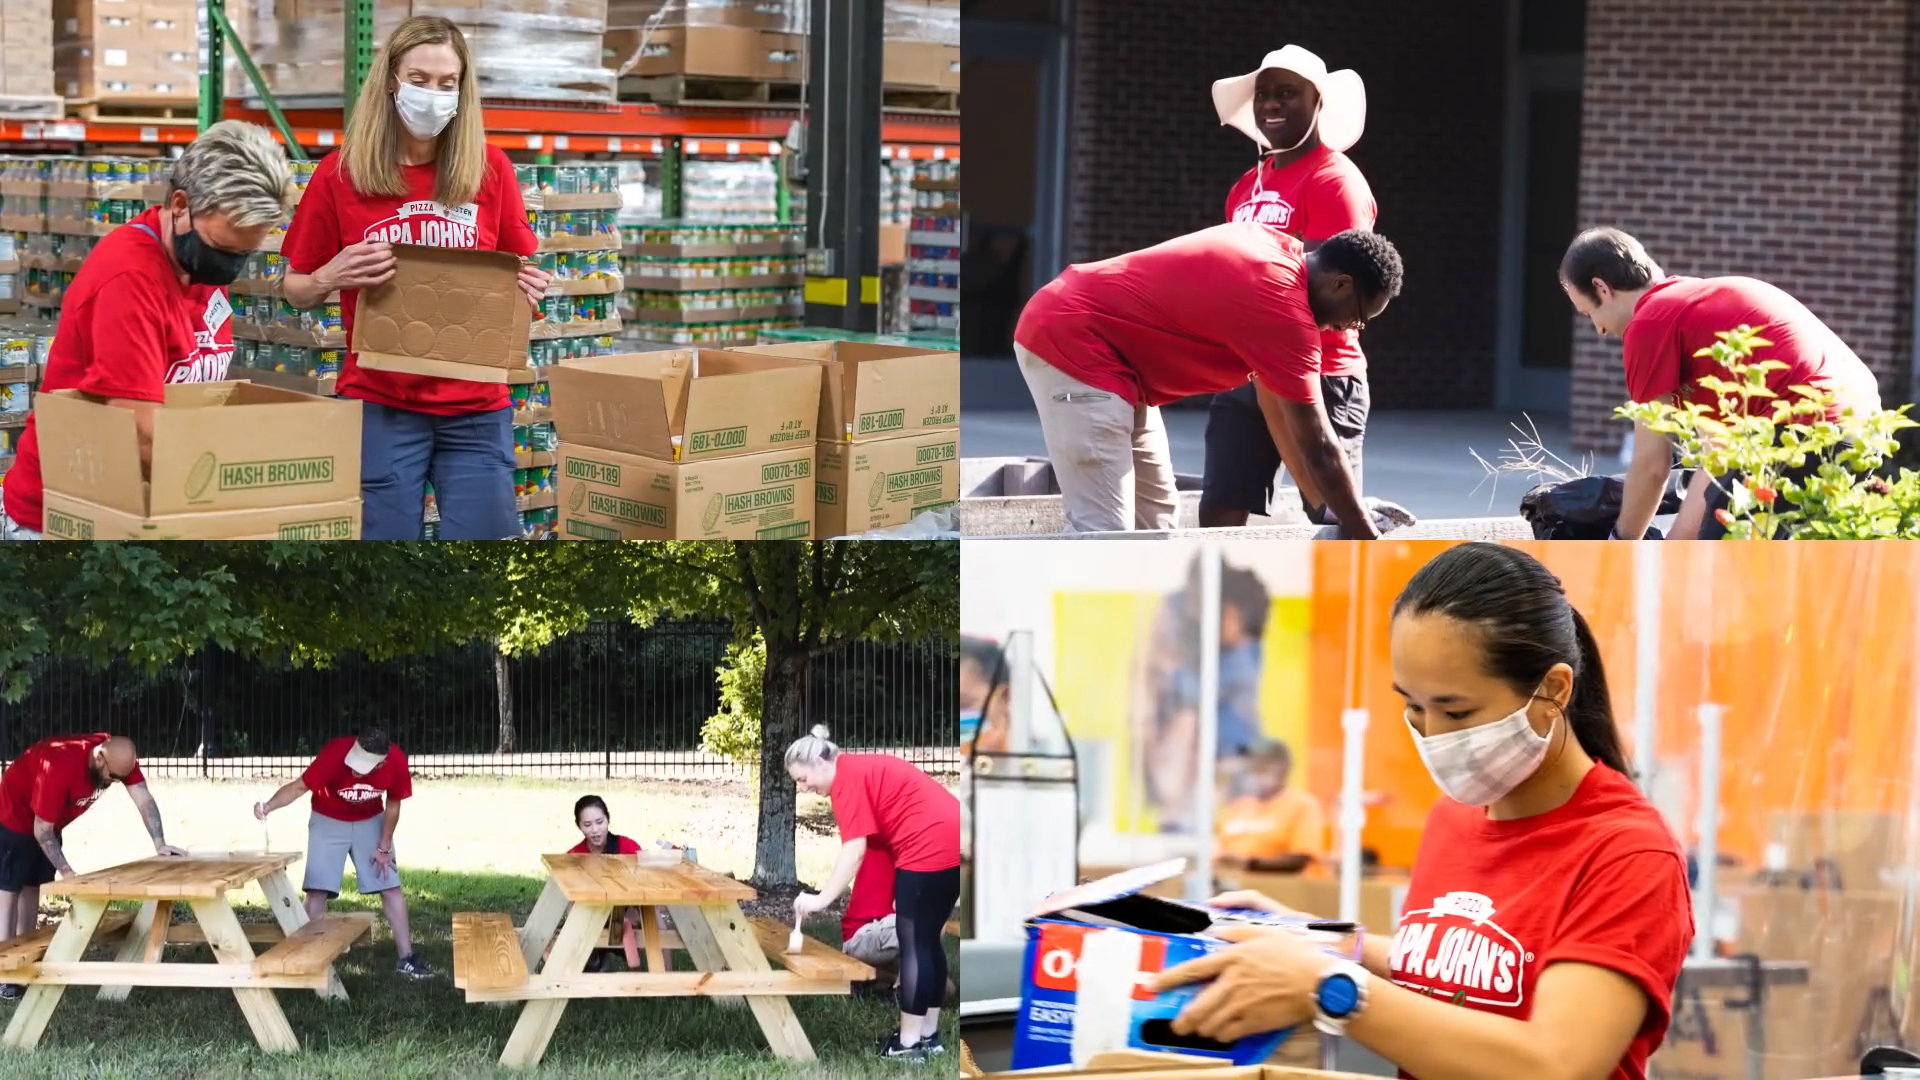 Papa Johns released its 2021 Corporate Responsibility Report, highlighting the company's latest initiatives to advance its ESG strategy and create meaningful impacts for stakeholders.